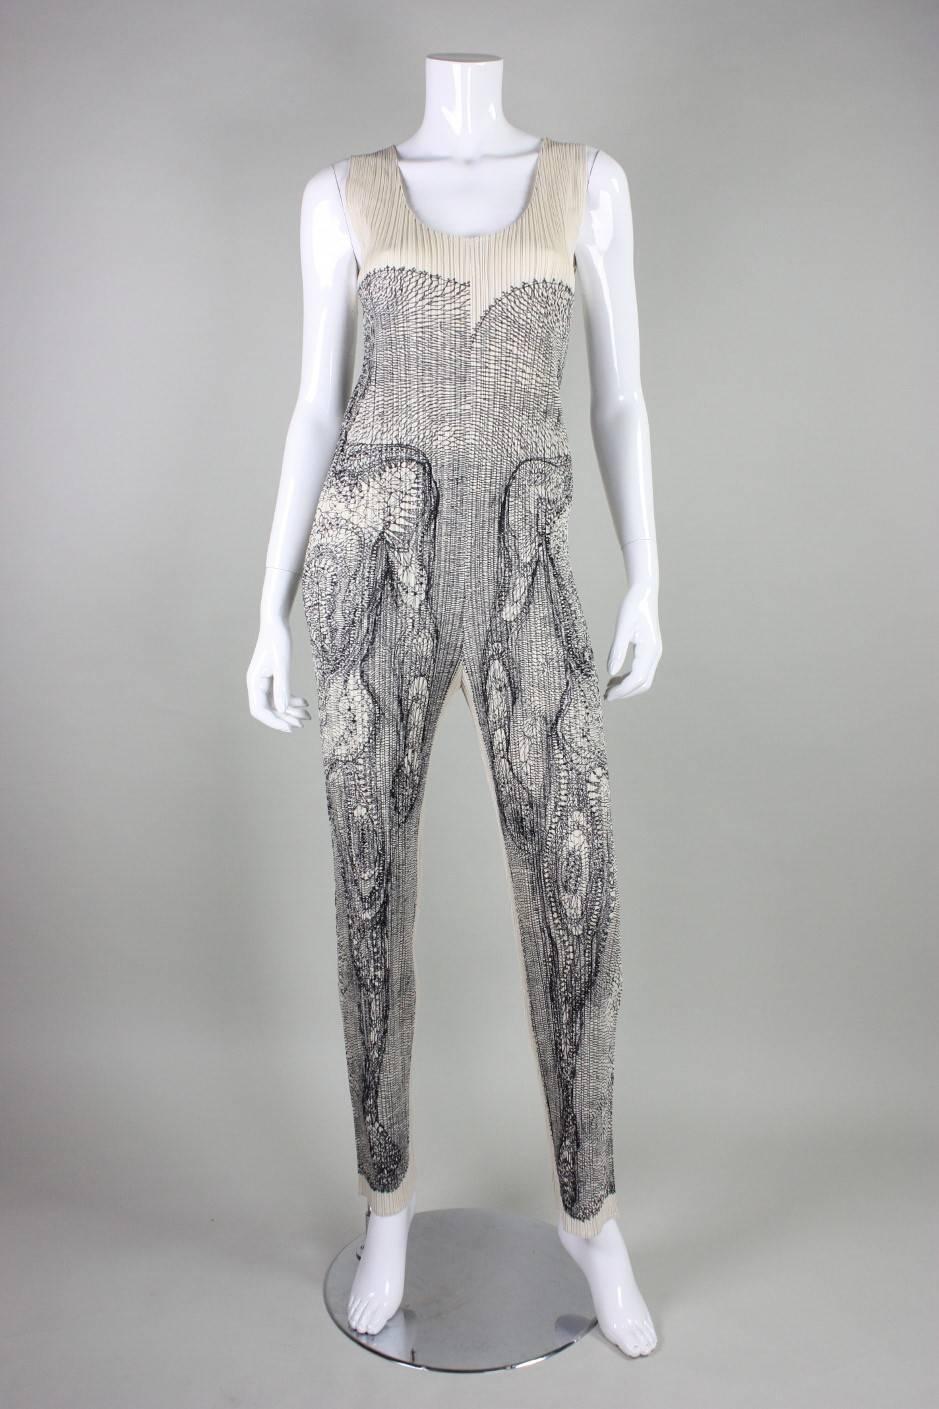 Issey Miyake Artist Series No. 3- Tim Hawkinson is made of cream pleated polyester.  No closures.  Unlined.  New with tags.
Labeled a size 4, but please refer to measurements as it would fit a wide variety of sizes. Jumpsuit was not pinned on